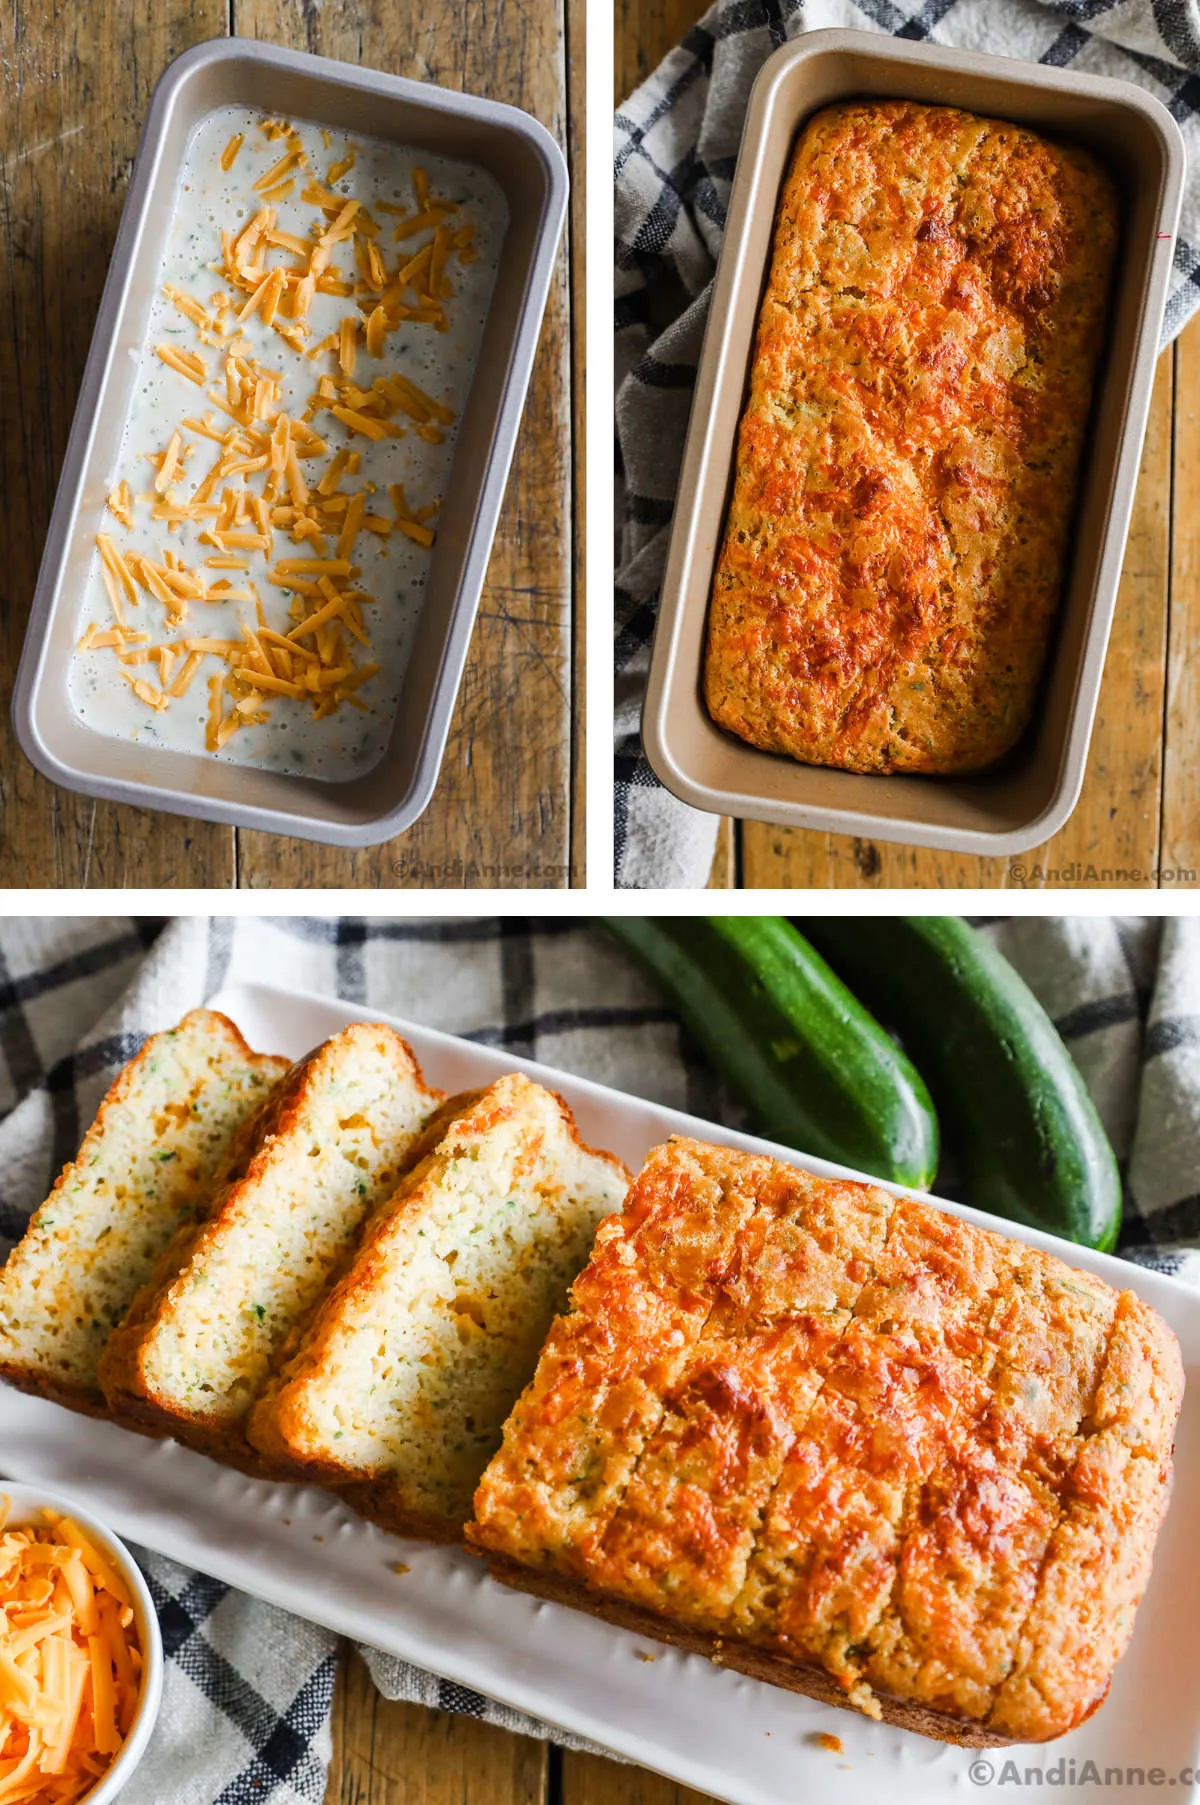 Three overhead images in one: 1. Mixed batter is in loaf pan with shredded cheese on top. 2. Cooked loaf is golden brown and orange inside loaf pan. 3. Sliced bread sits on white plate with zucchini and shredded cheese in background. 